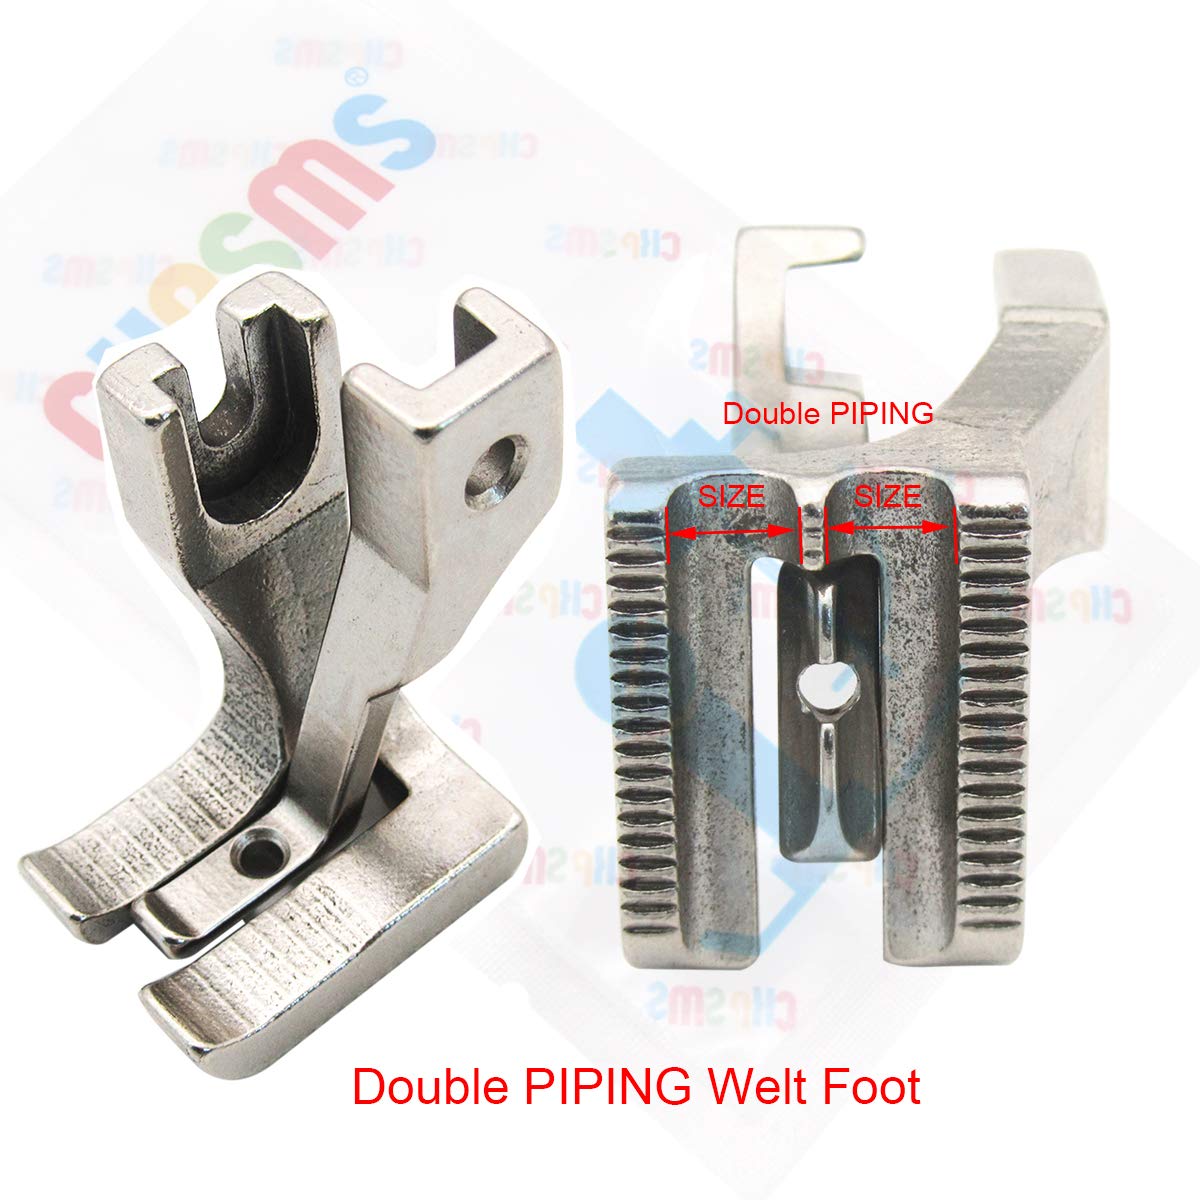 CKPSMS Brand -#KP-19074-7 7SET Double Piping & Welting Zipper Feet Compatible with JUKI DU-141 DU-1181 CONSEW 205RB+